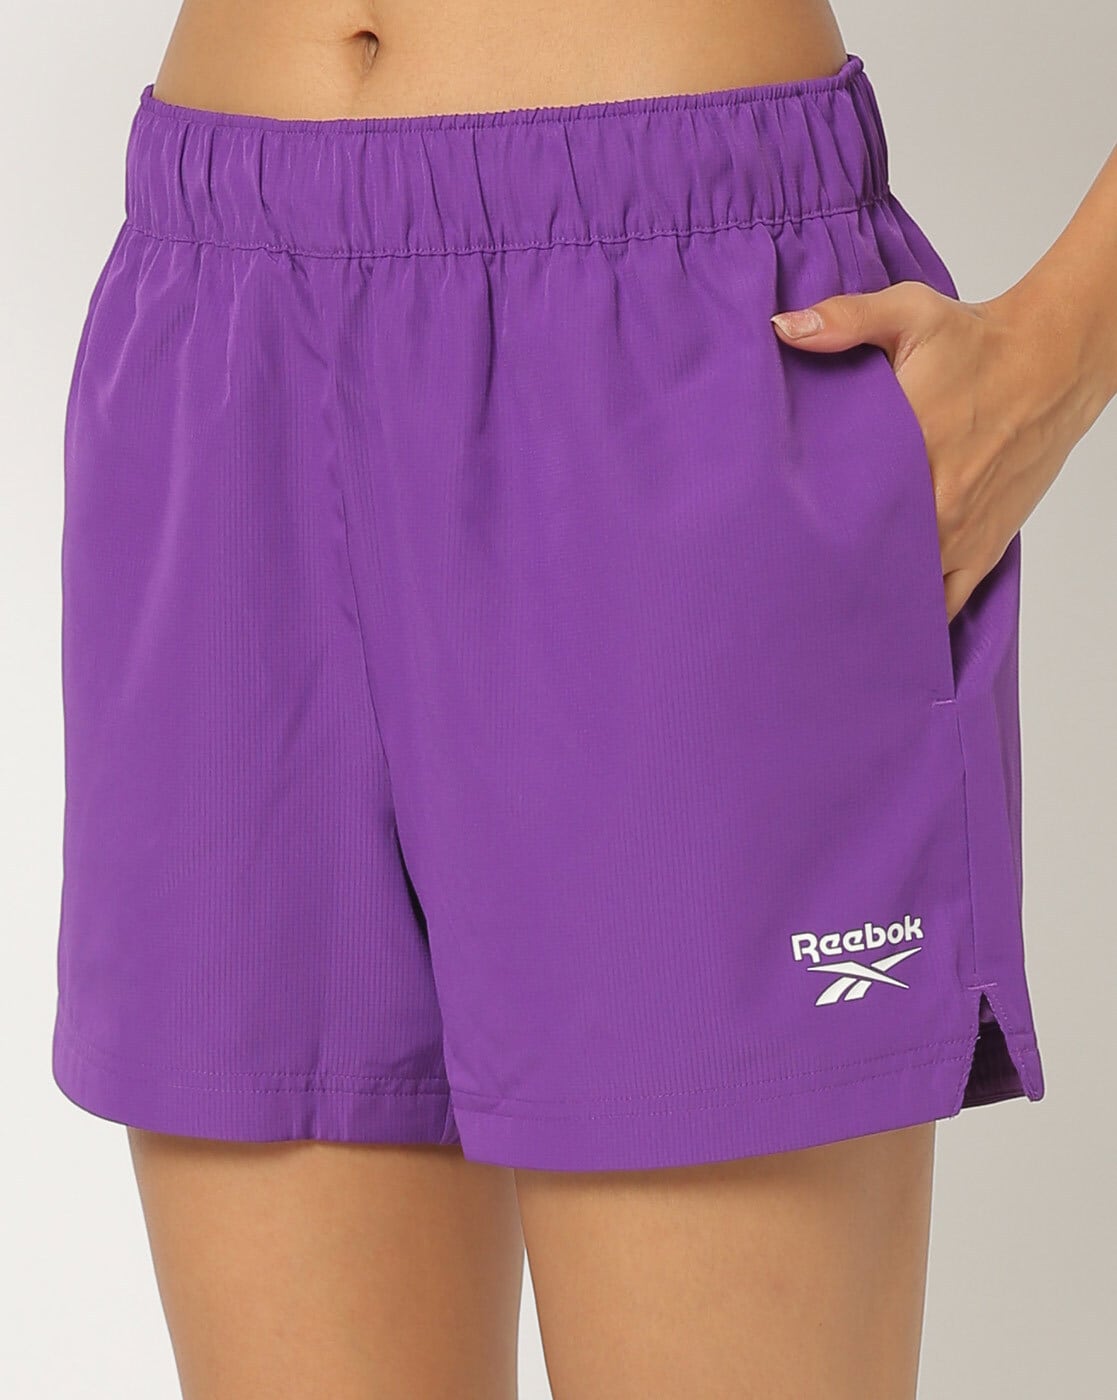 Buy Reebok toddlers girl sports fit brand logo pull on shorts